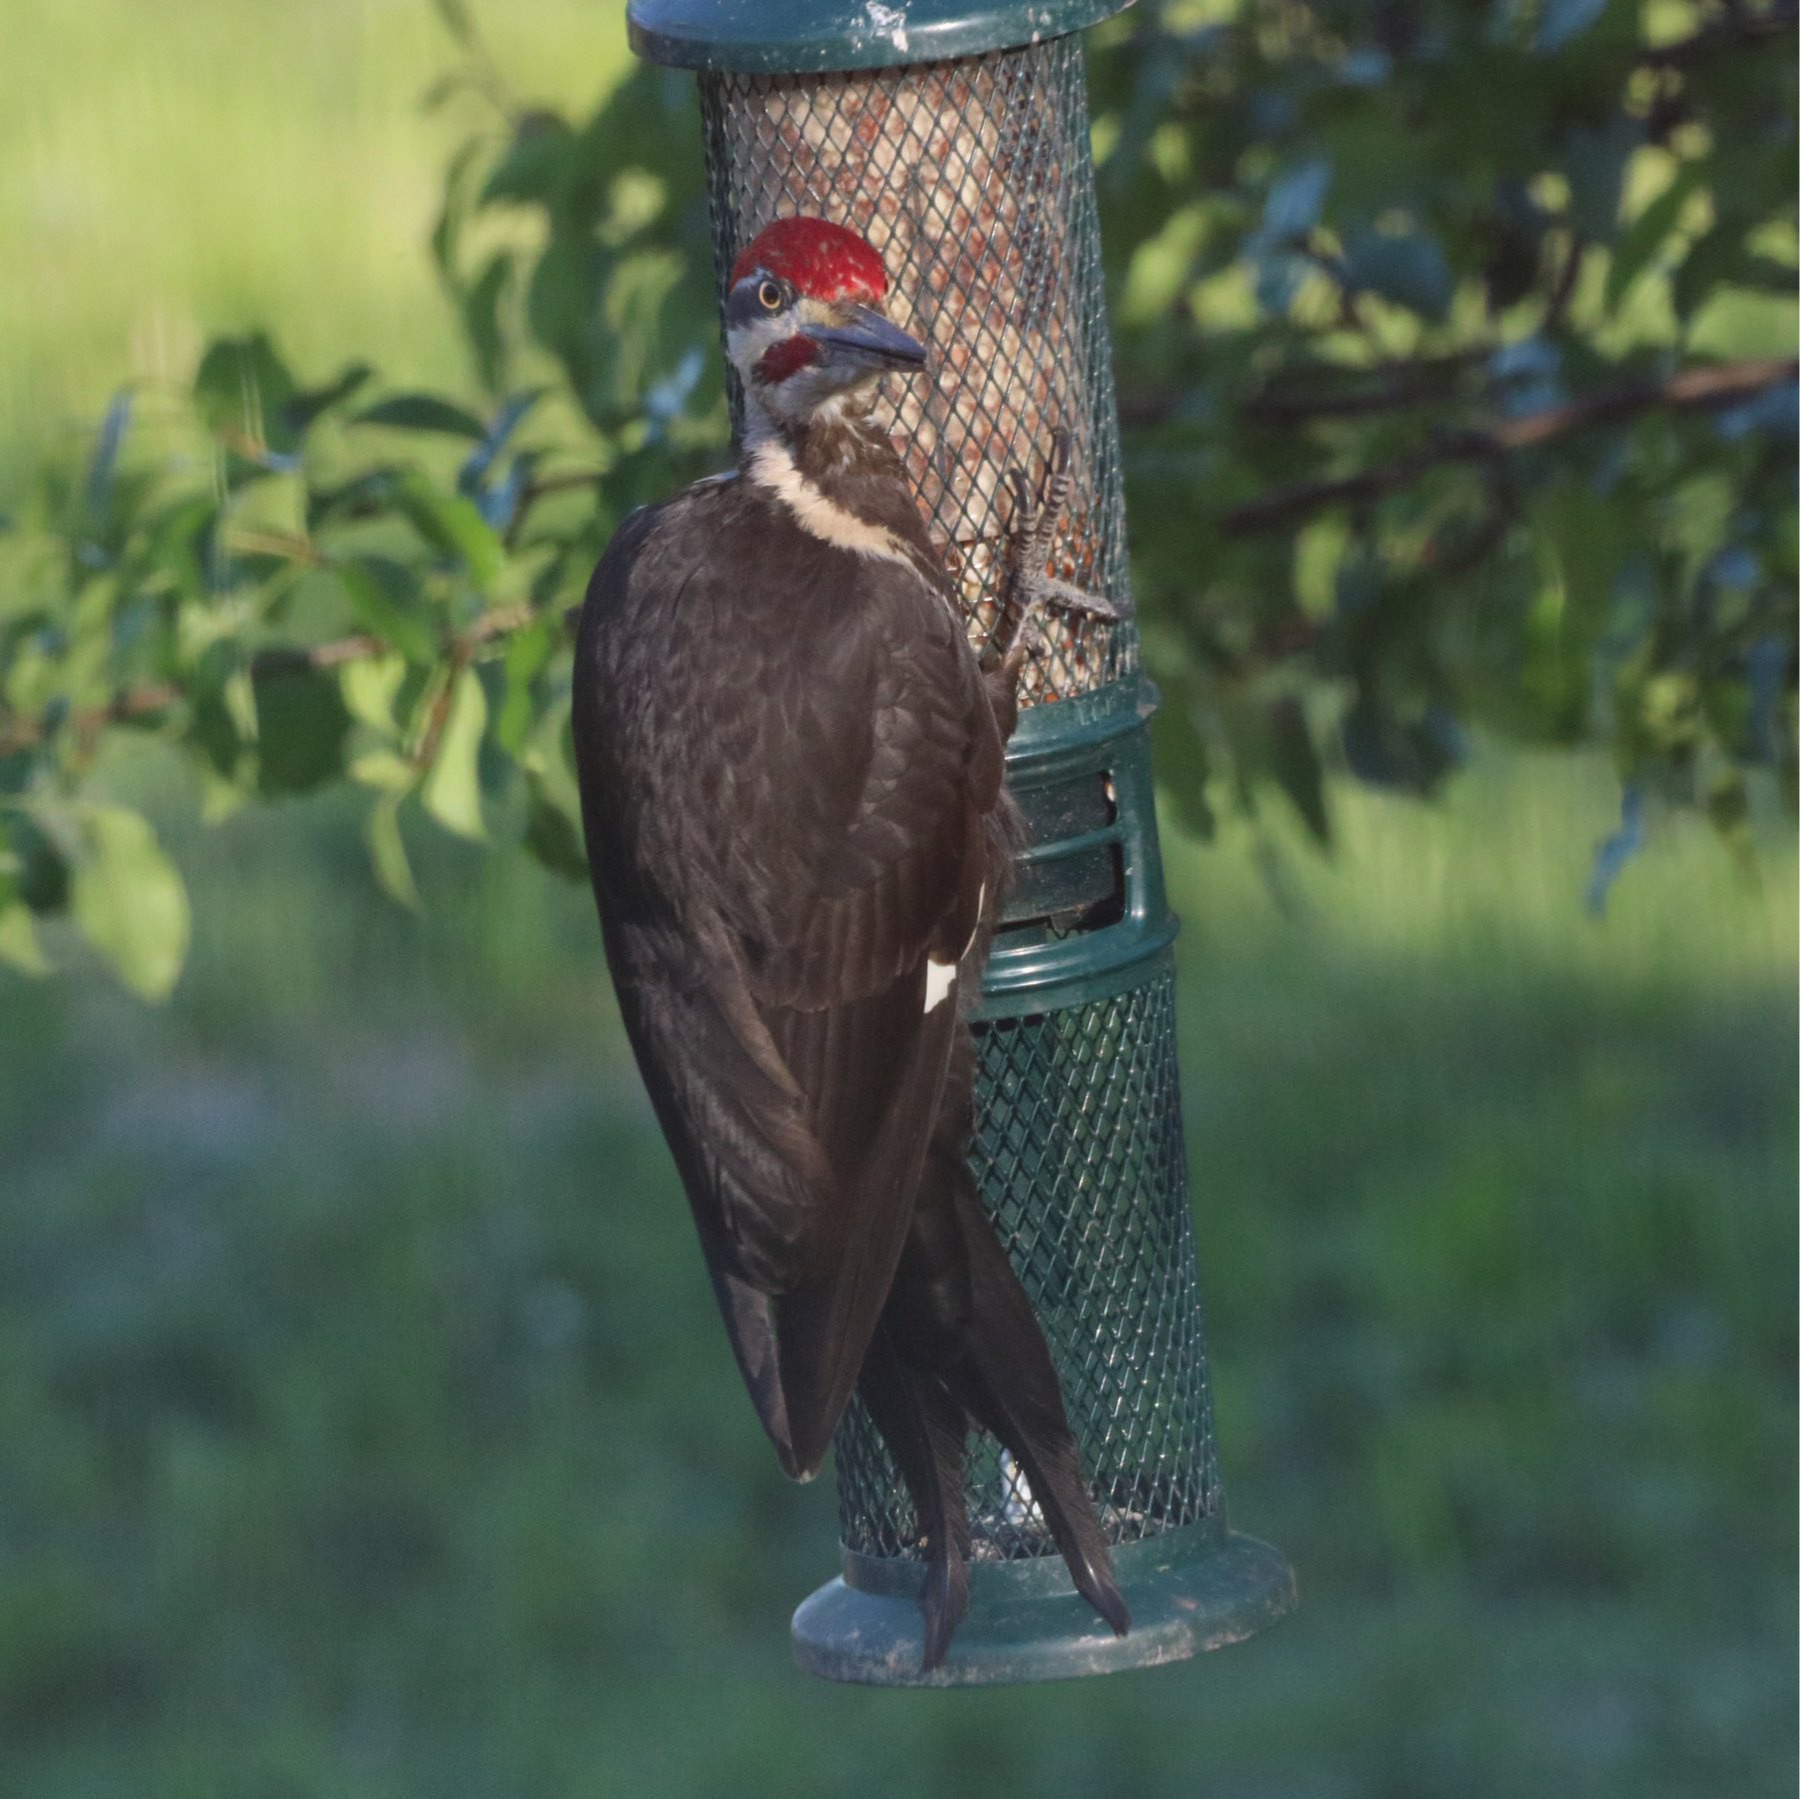 Pileated woodpecker on a green feeder